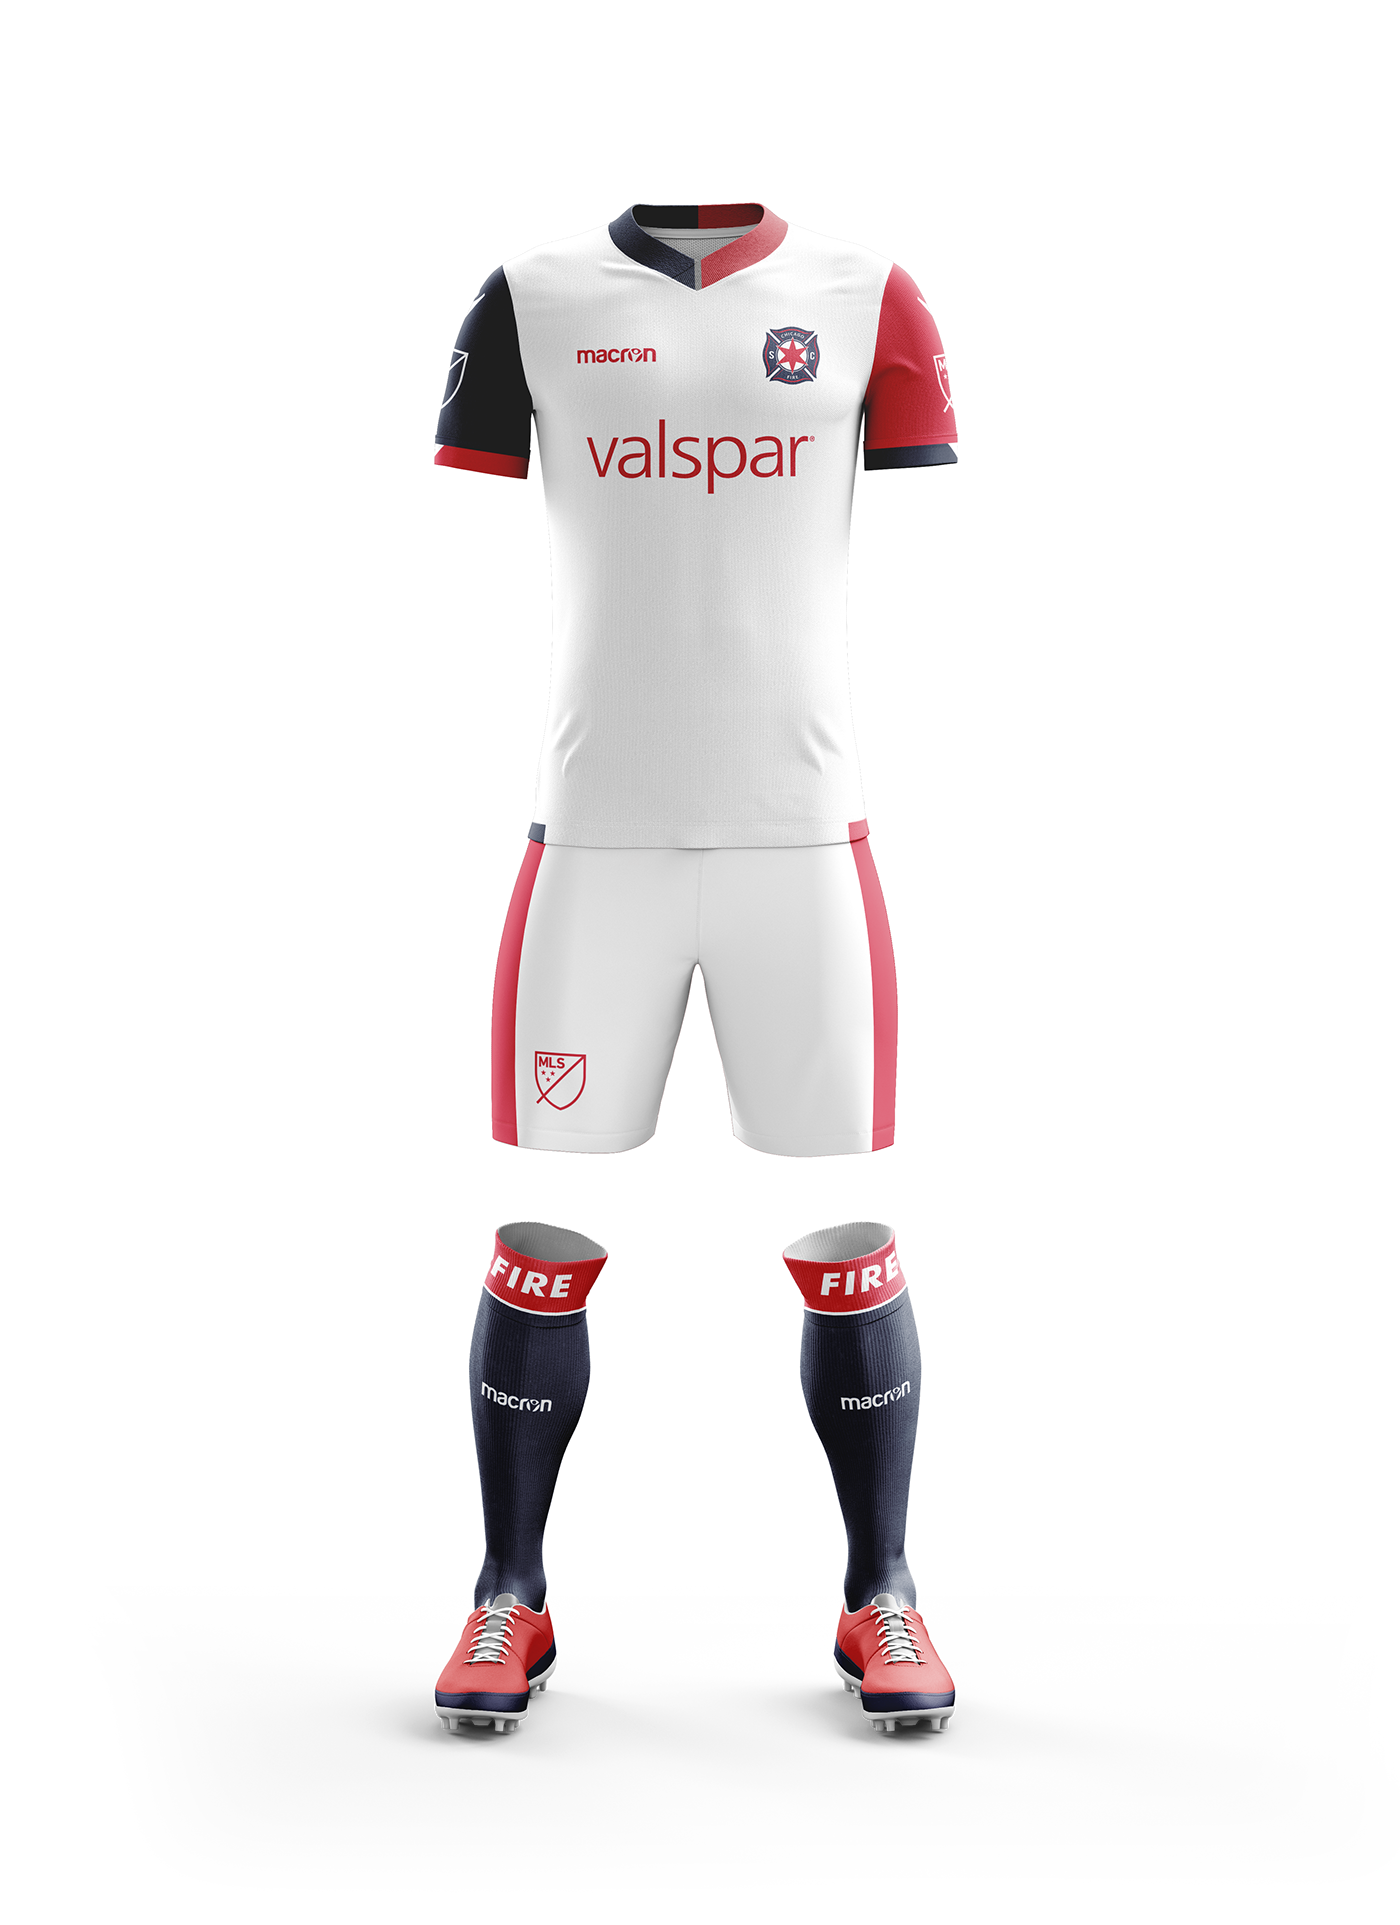 soccer football redesign chicago fire mls